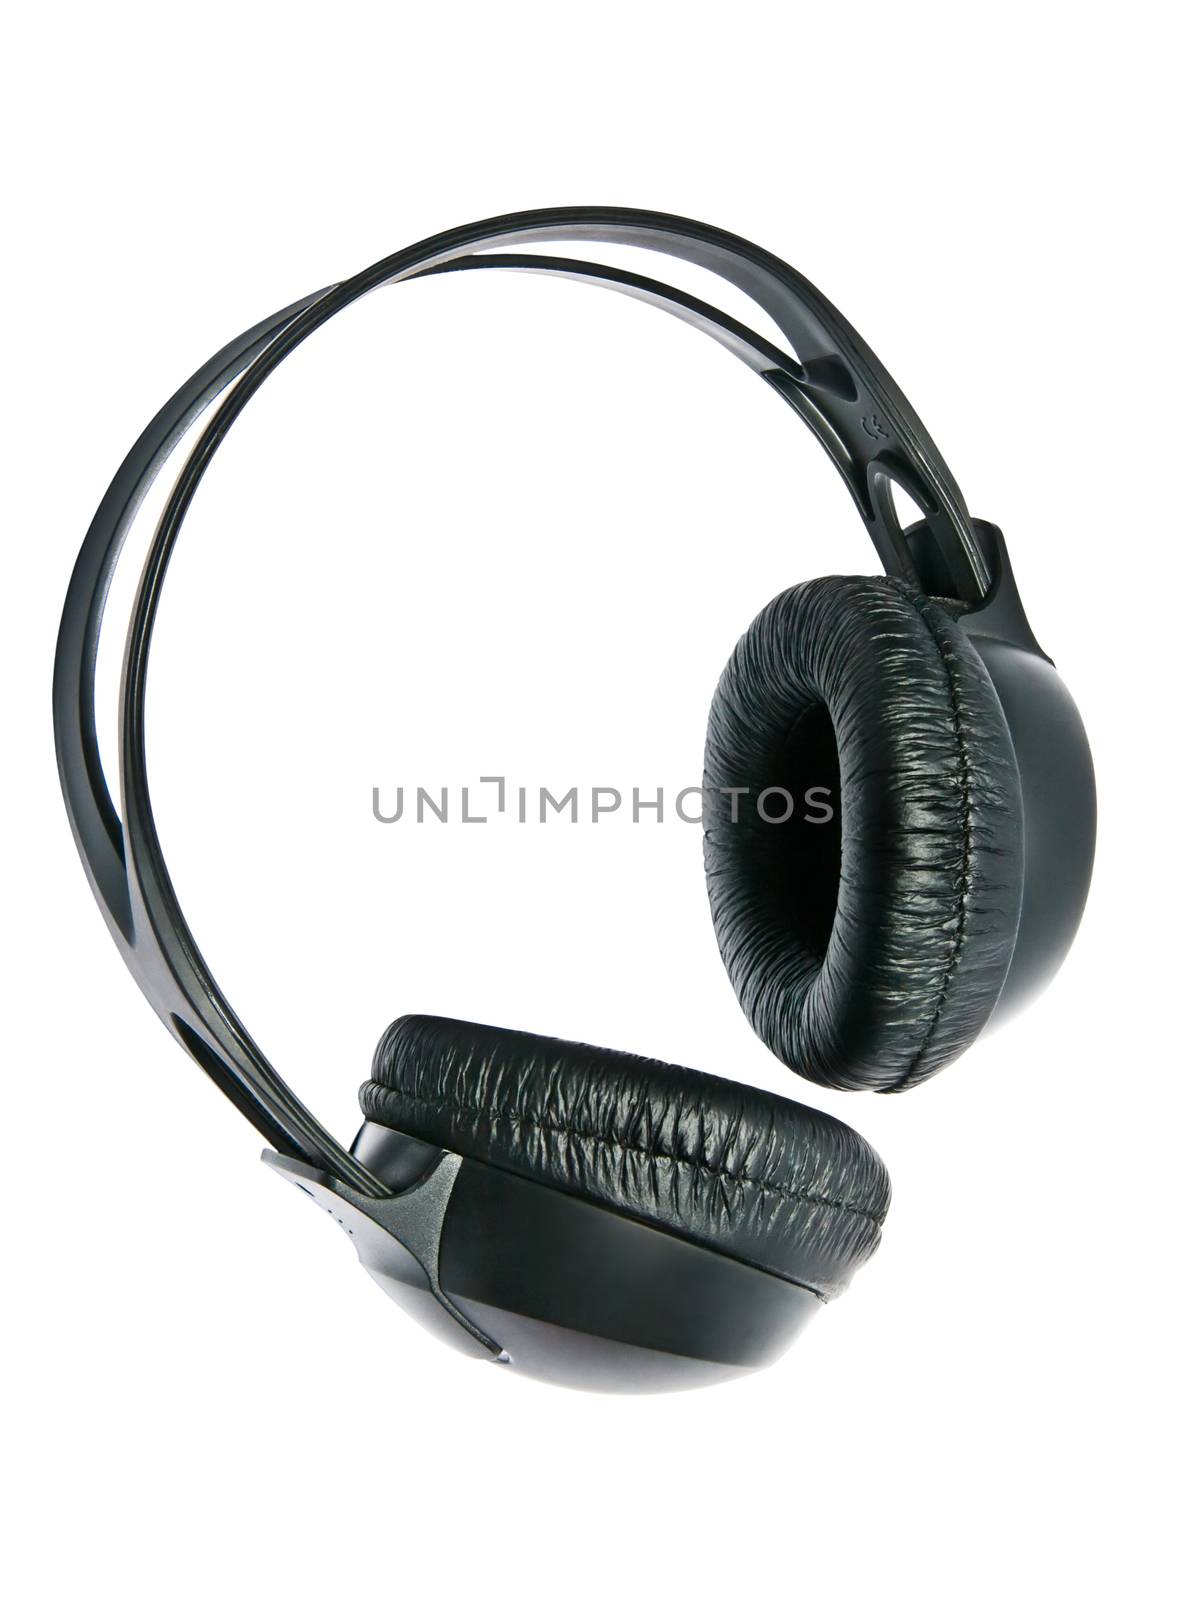 Black headphones closed type on a white background. Isolated.